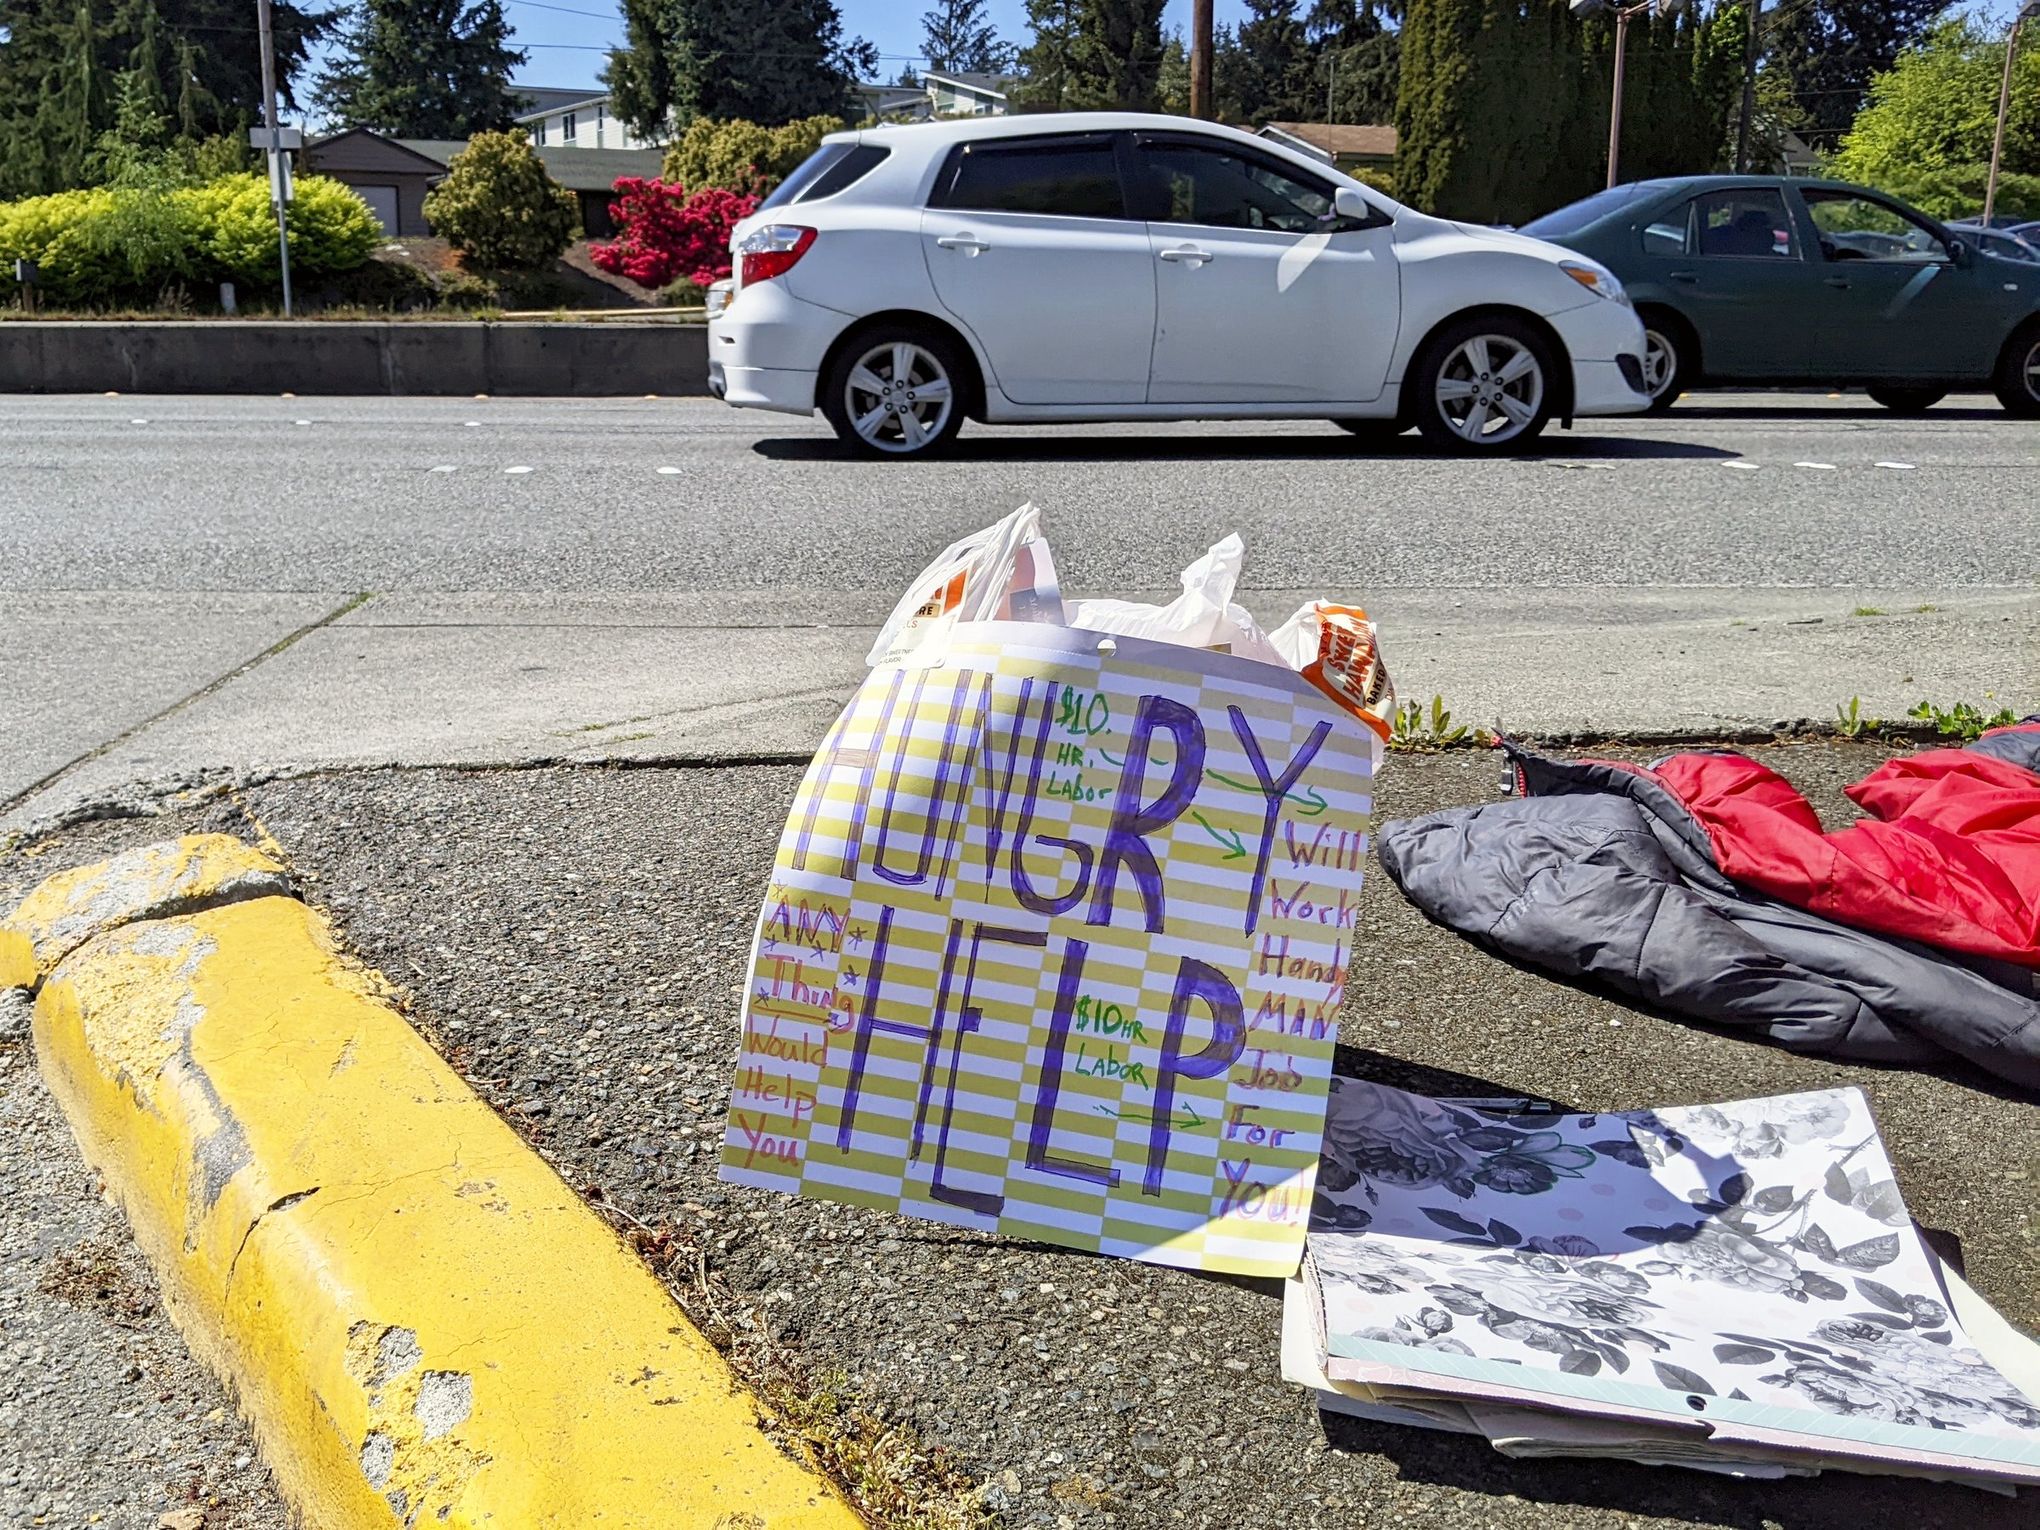 “Hungry, help,” reads a sign by Brad Peterson, 51, who advertises that he is looking for work on Highway 99 in Edmonds.